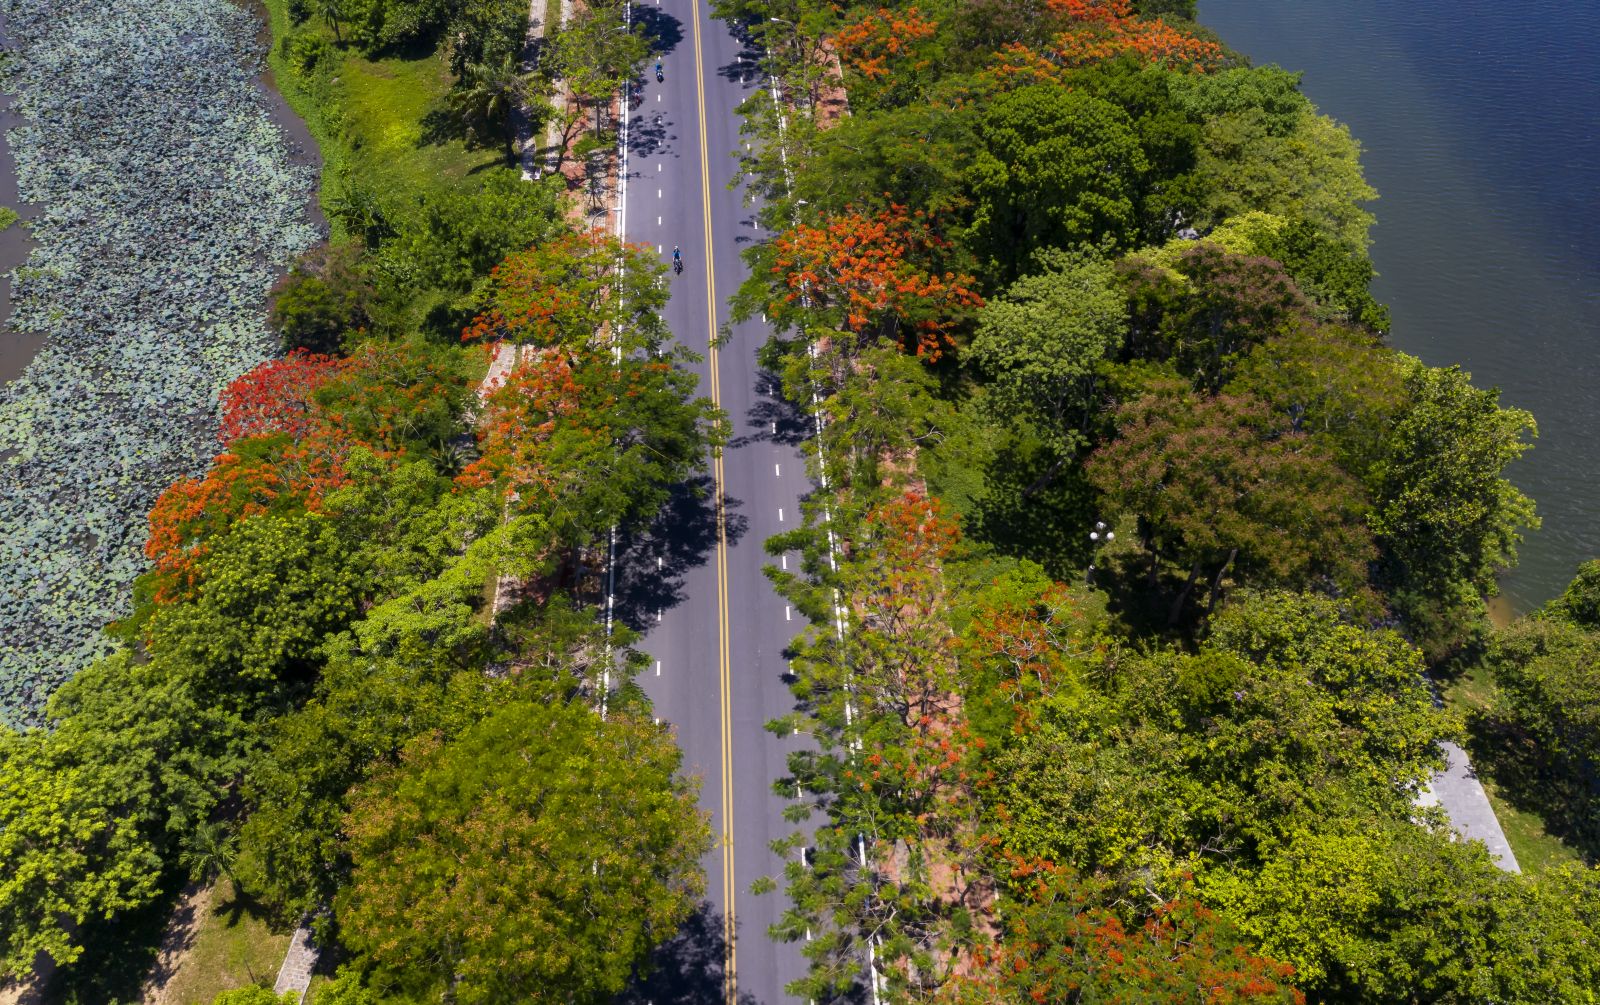 Le Duan street is more dreamy with the red color of the flamboyant flowers in the summer